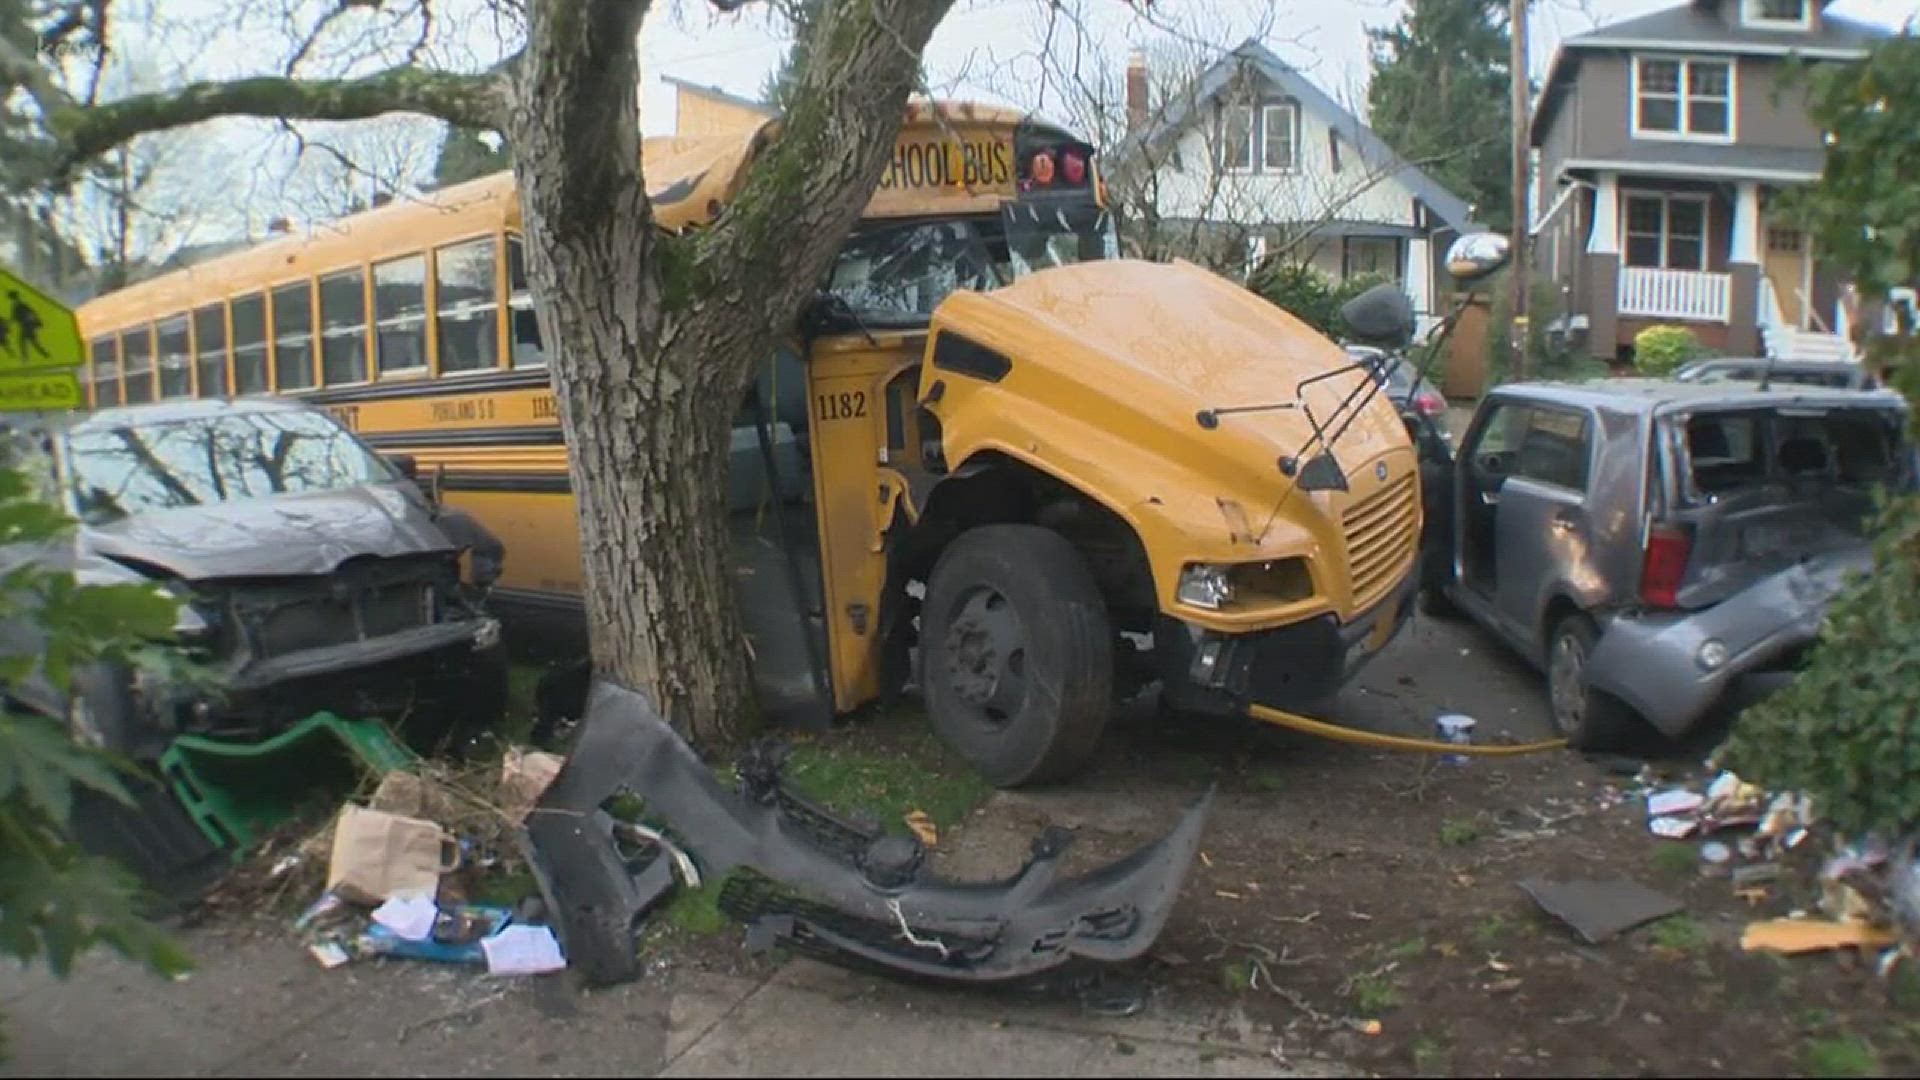 The driver of a school bus carrying 32 grade school students swerved to avoid a cat and hit two parked cars and a tree.